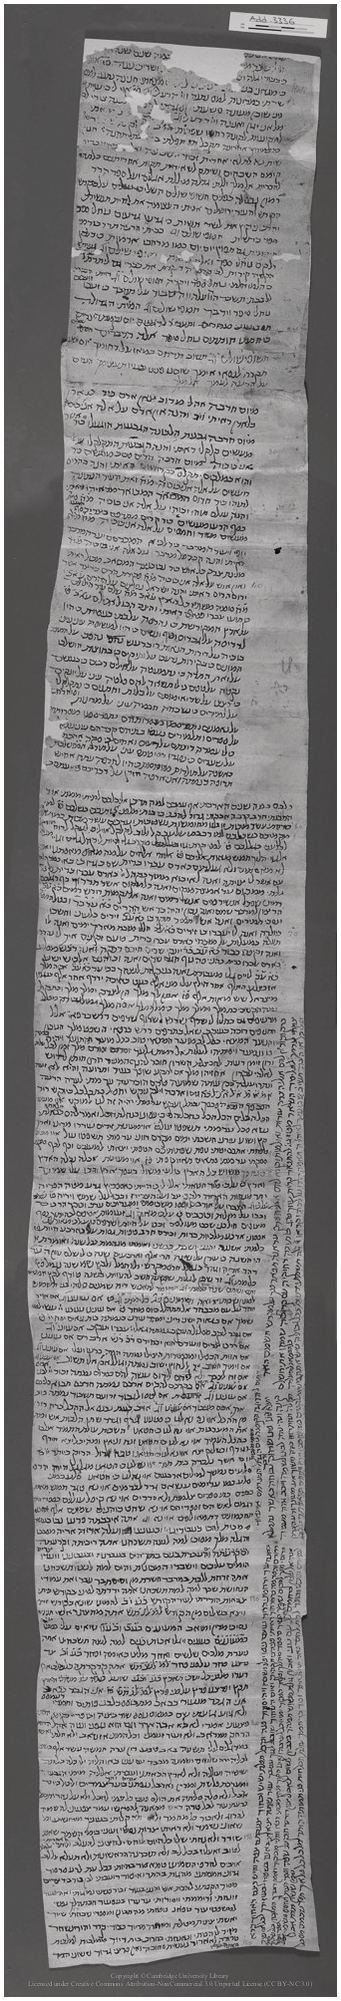 The Journey of Archbishop Samuel and the Dead Sea Scrolls - Guideposts